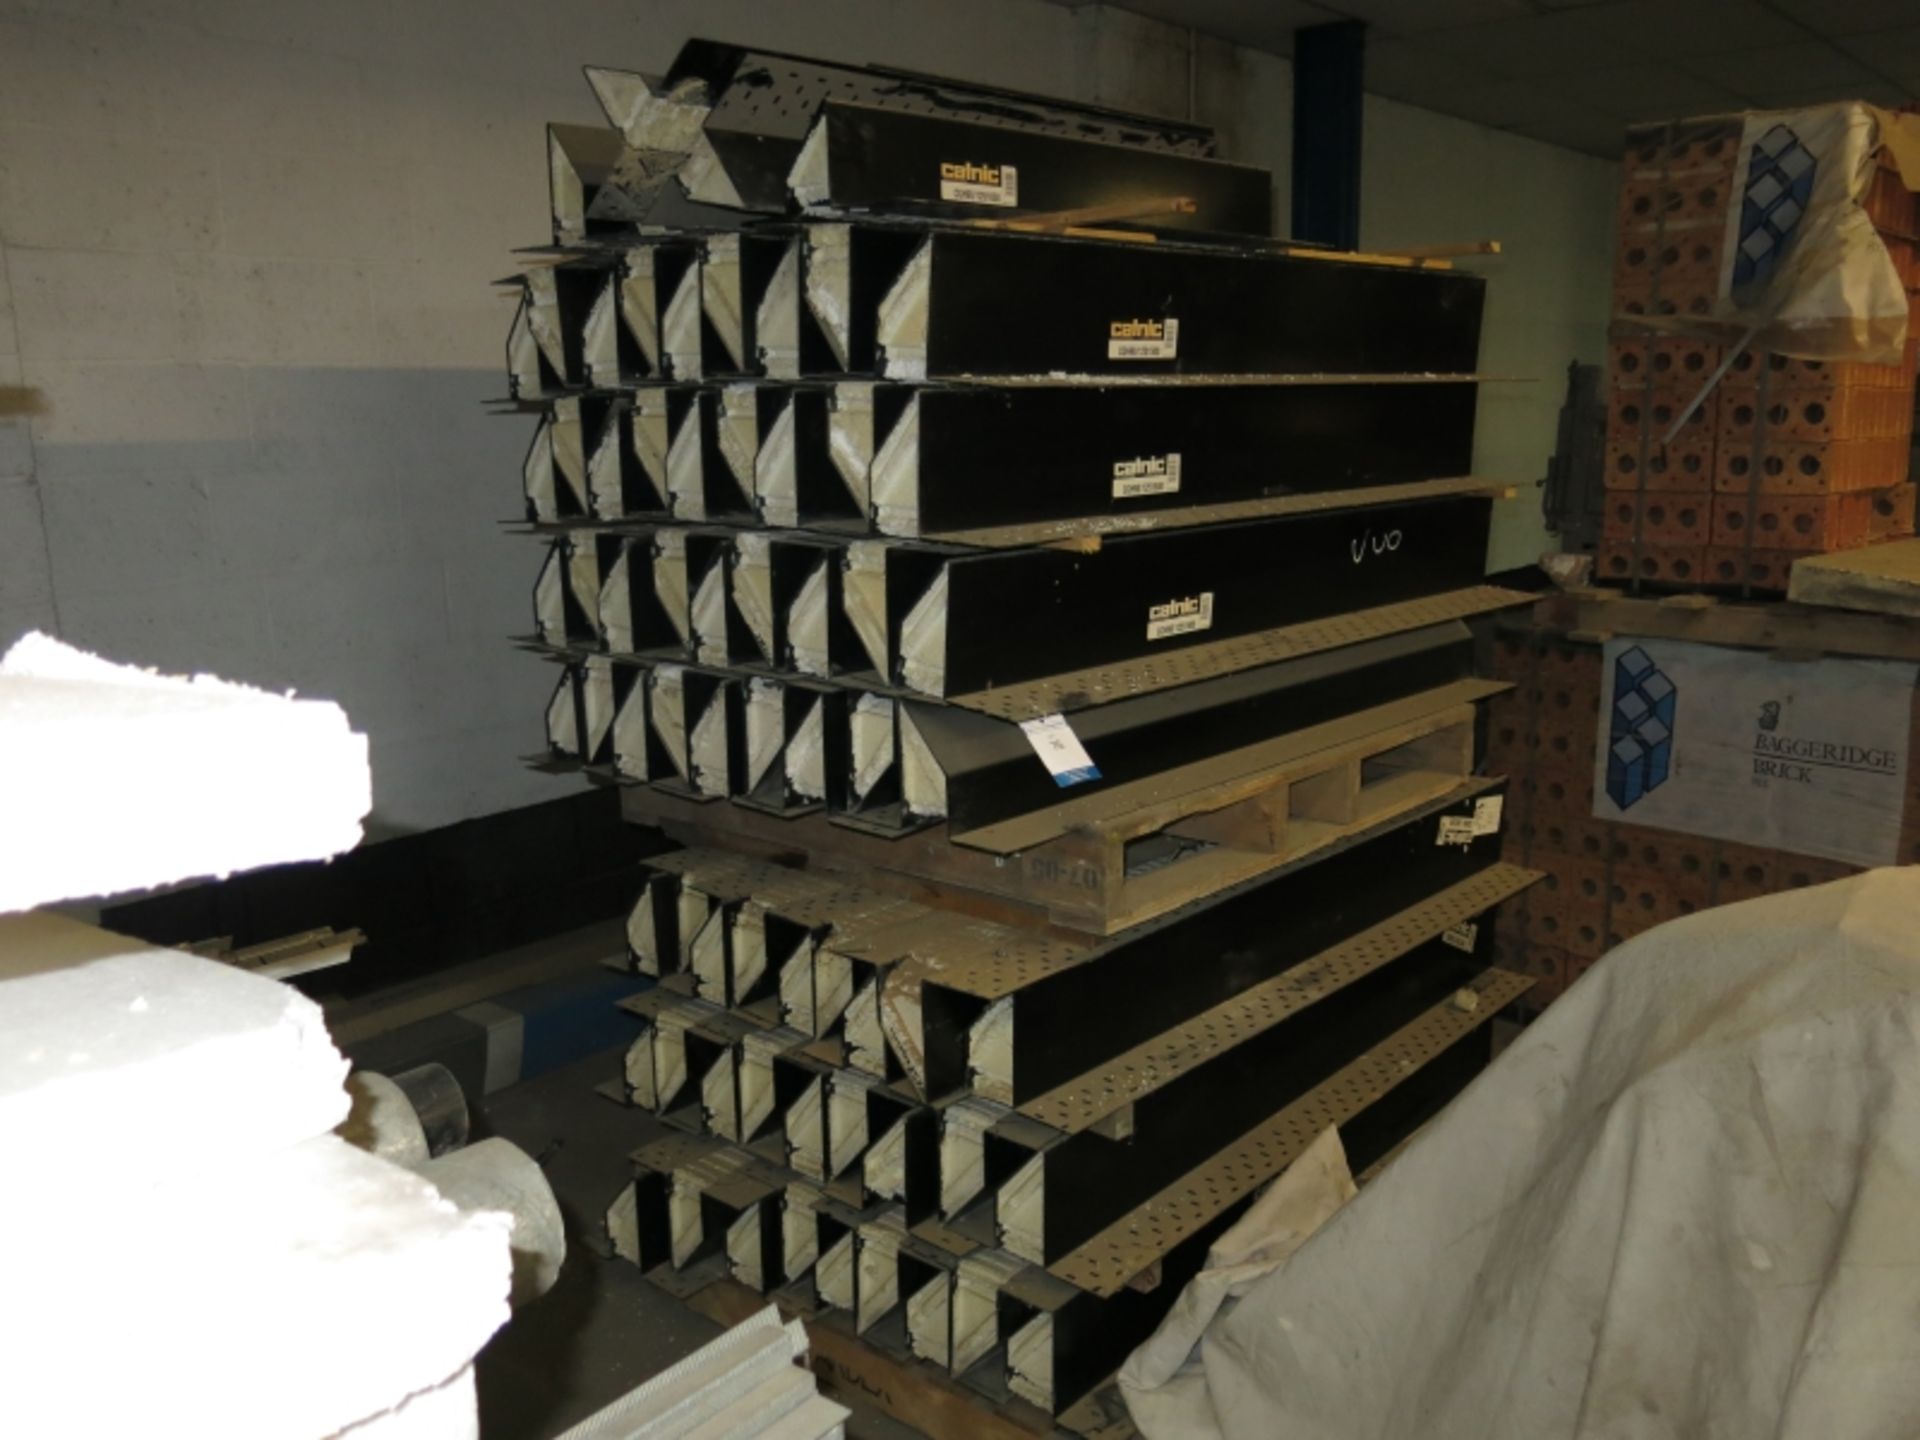 Catnic Lintels, 38x CGH 90/1251500, 27x CGH 90/1001500, 4x CGH 90/1251050. Buyer to remove and load. - Image 2 of 4